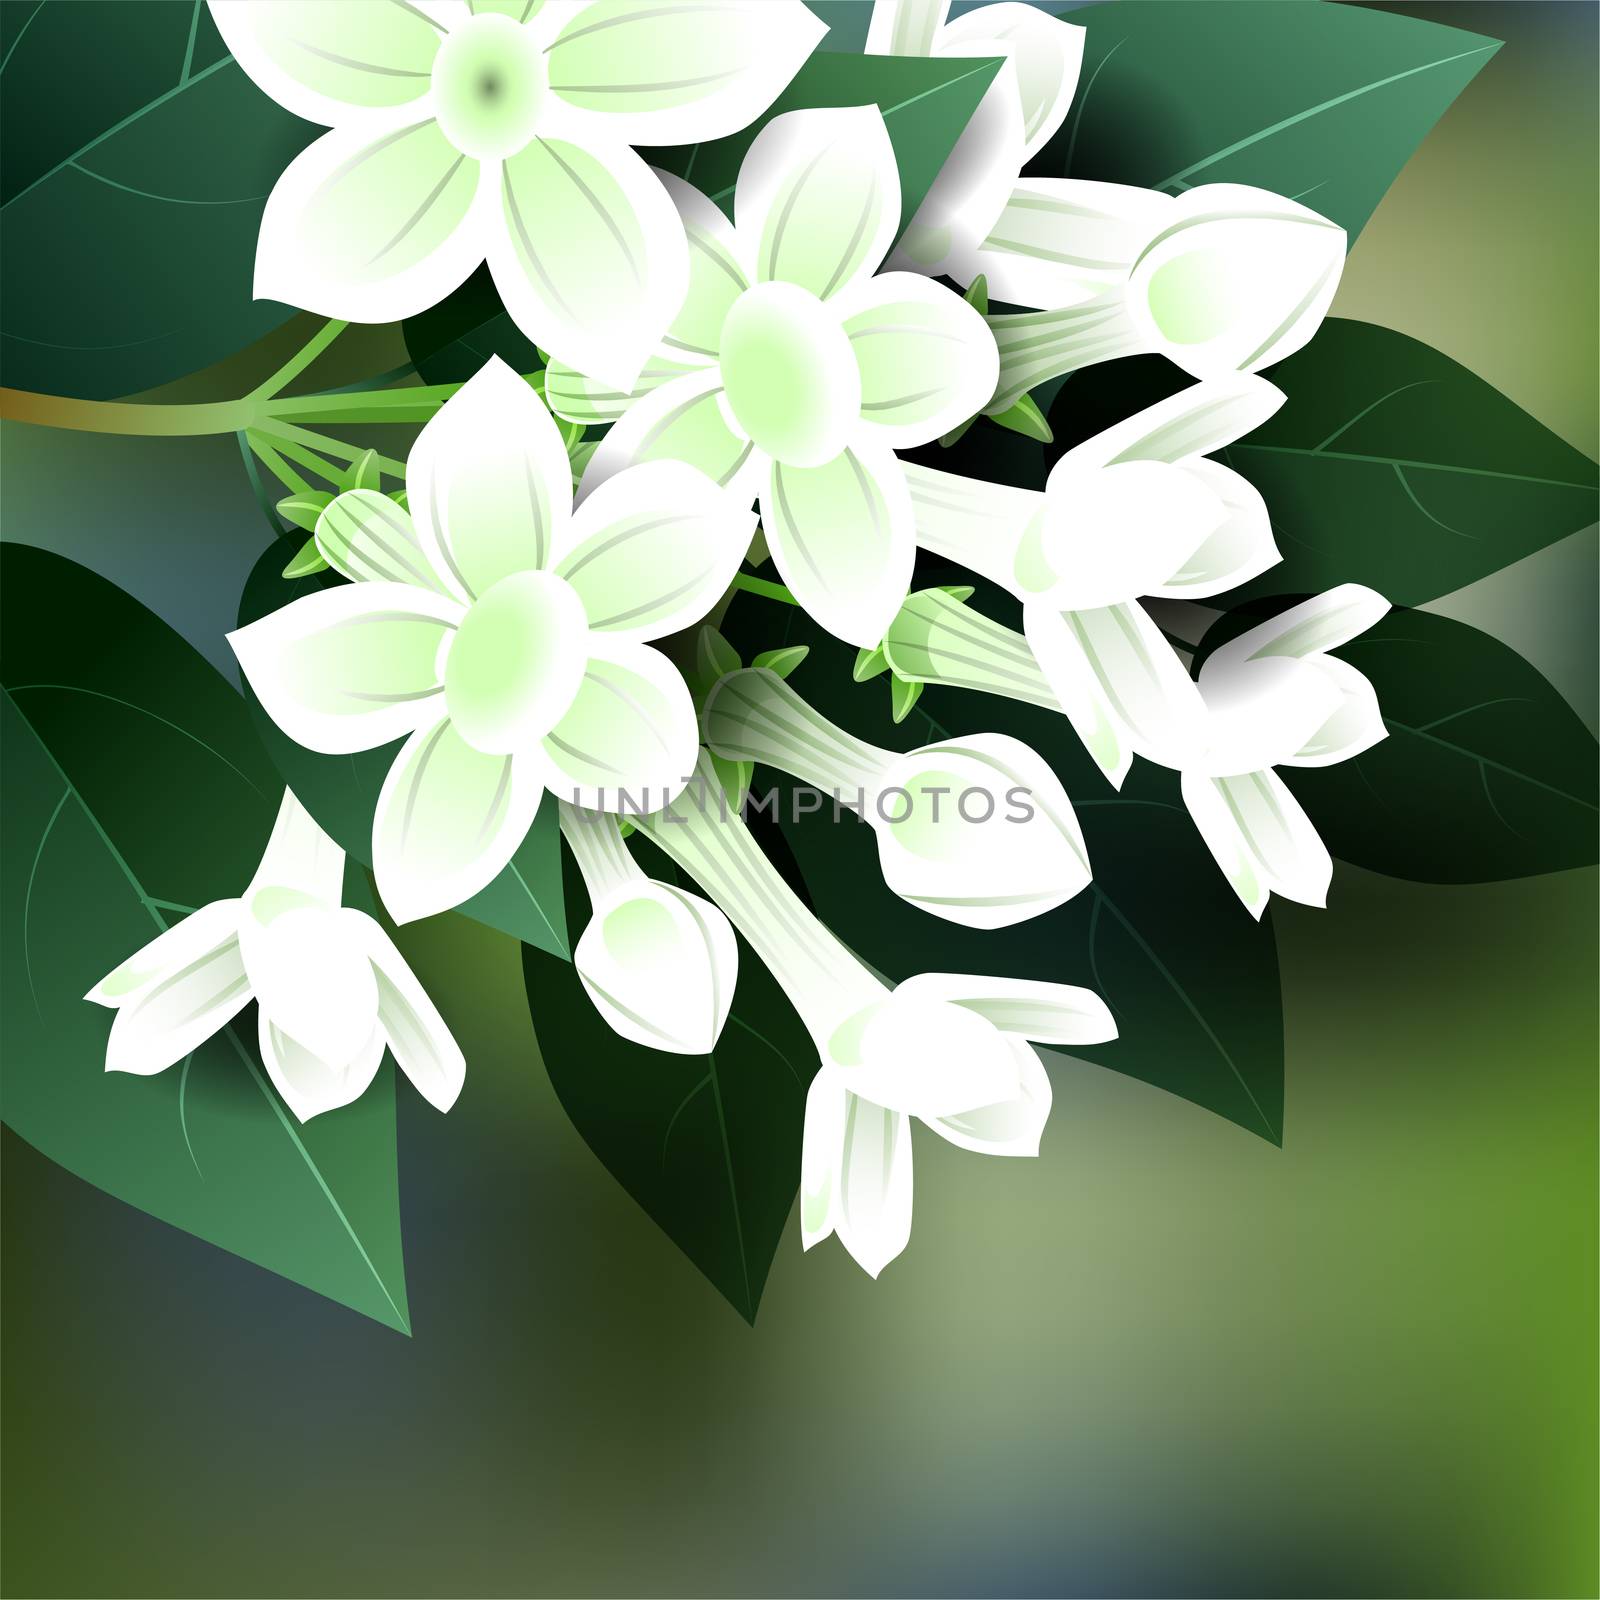 Beautiful spring flowers stephanotis. Cards or your design with space for text. by Adamchuk